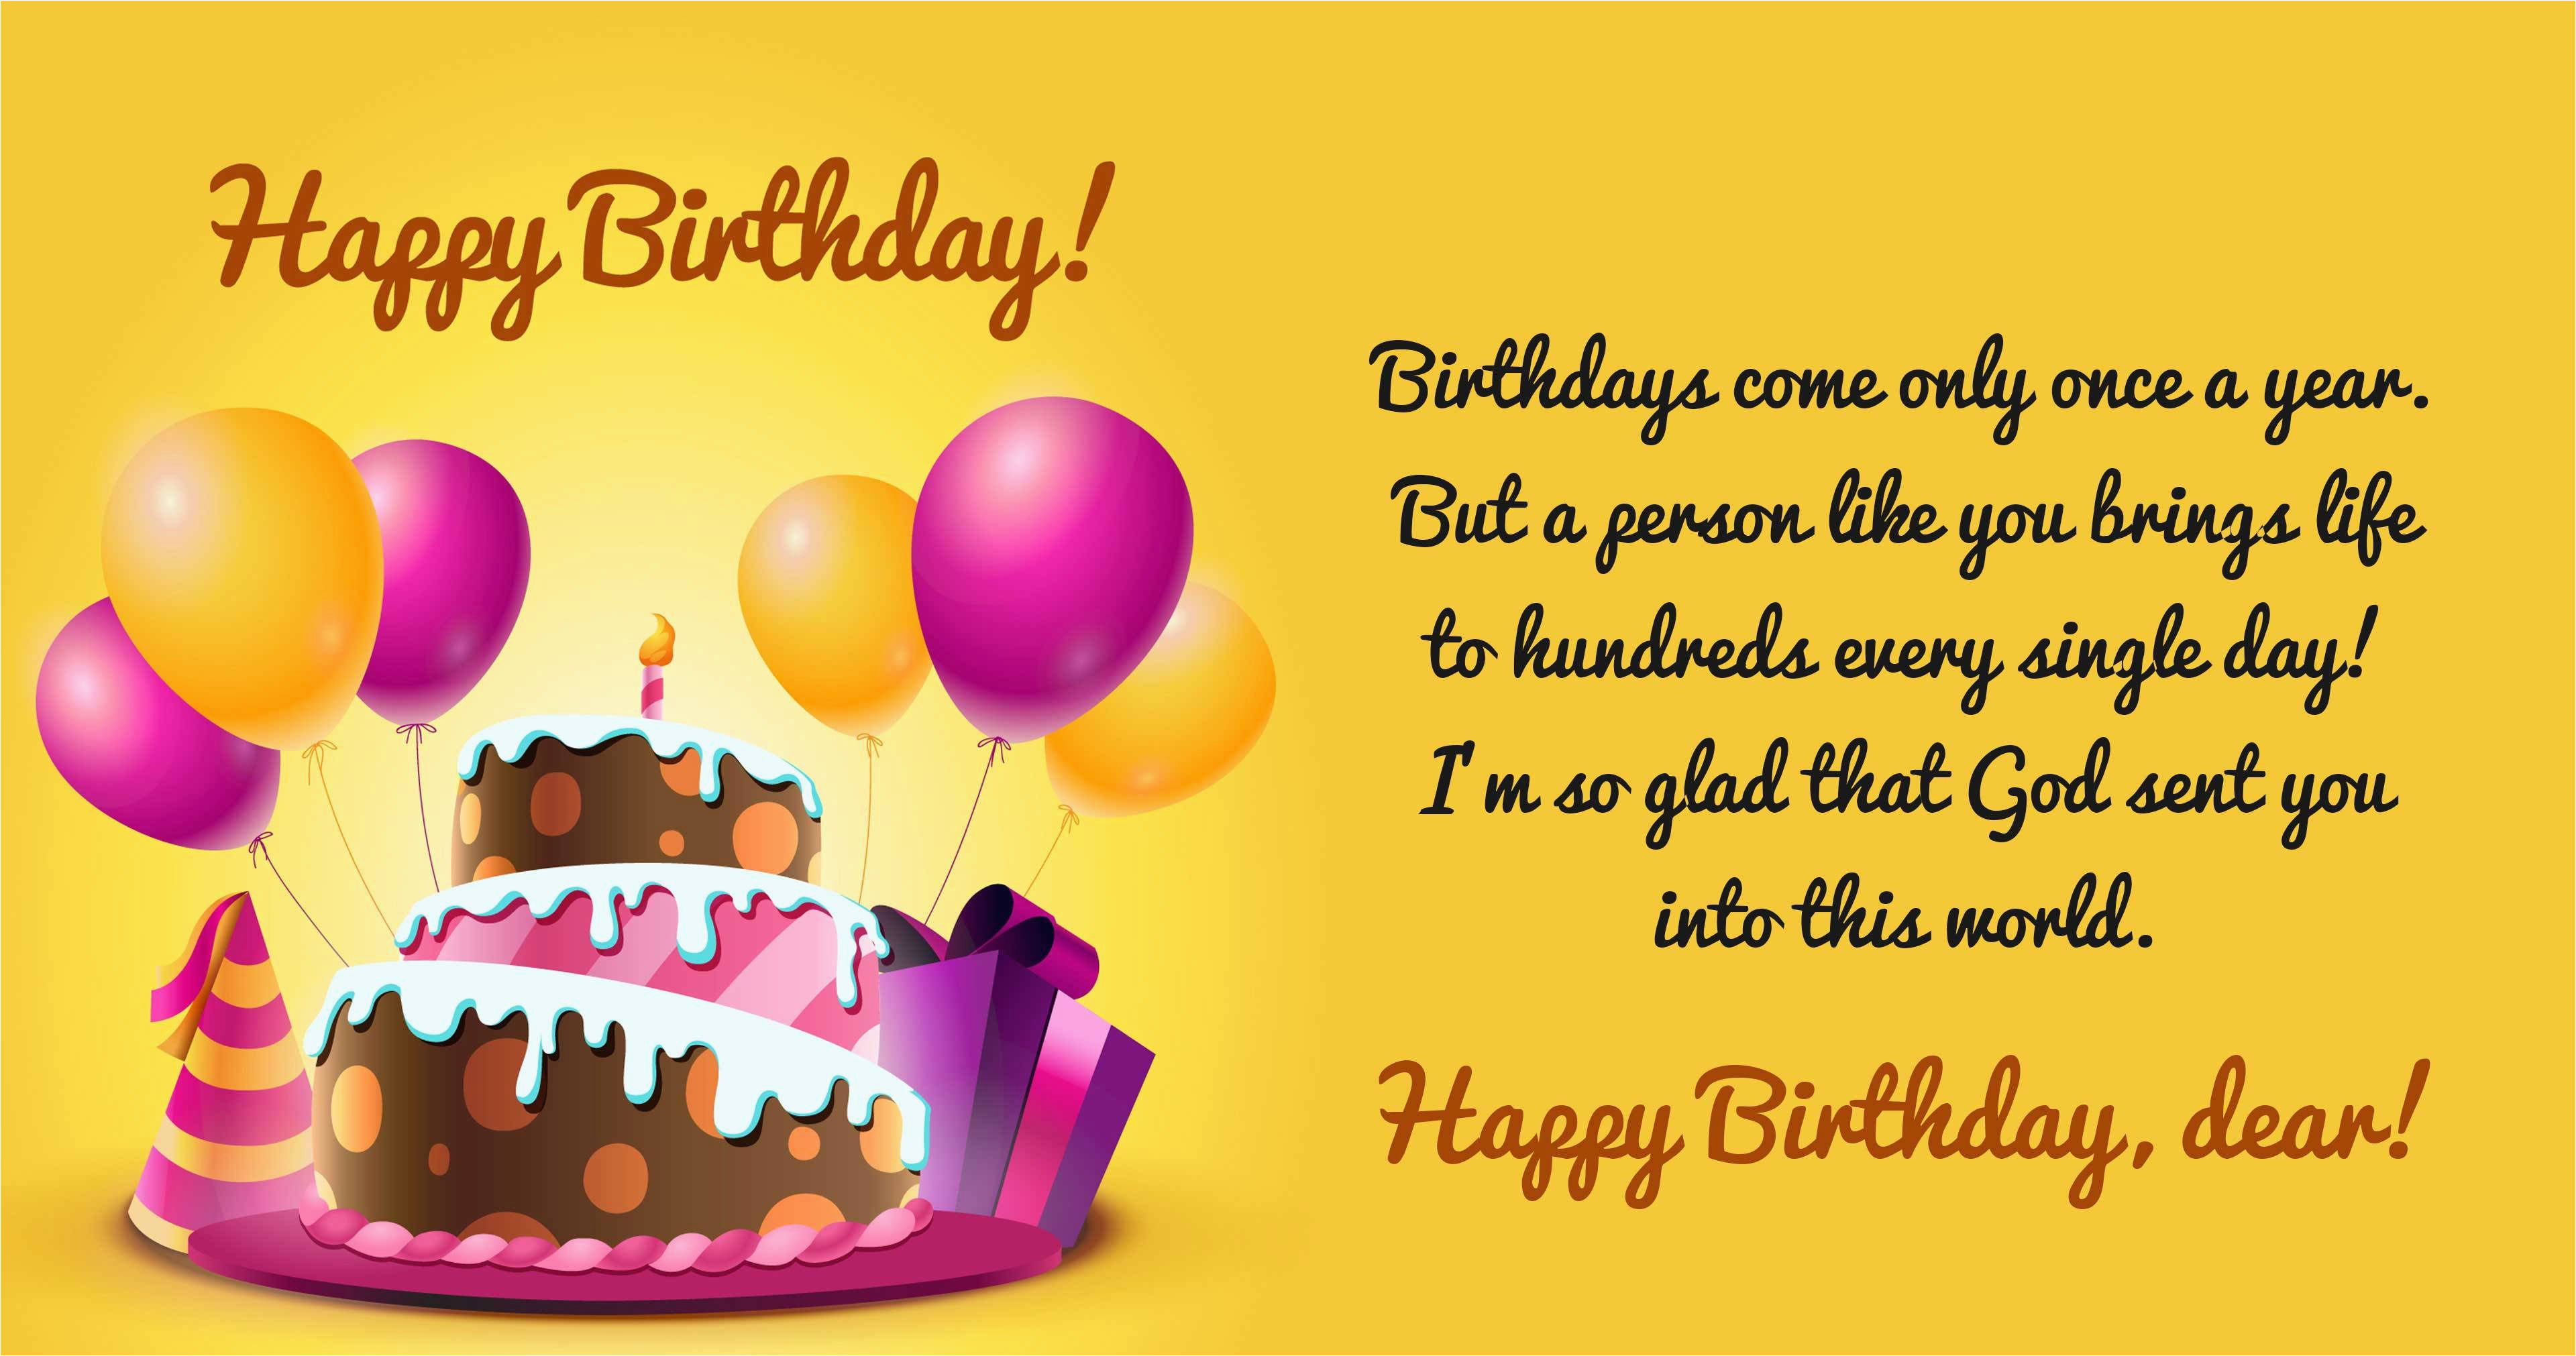 happy birthday quotes sayings wishes images lines